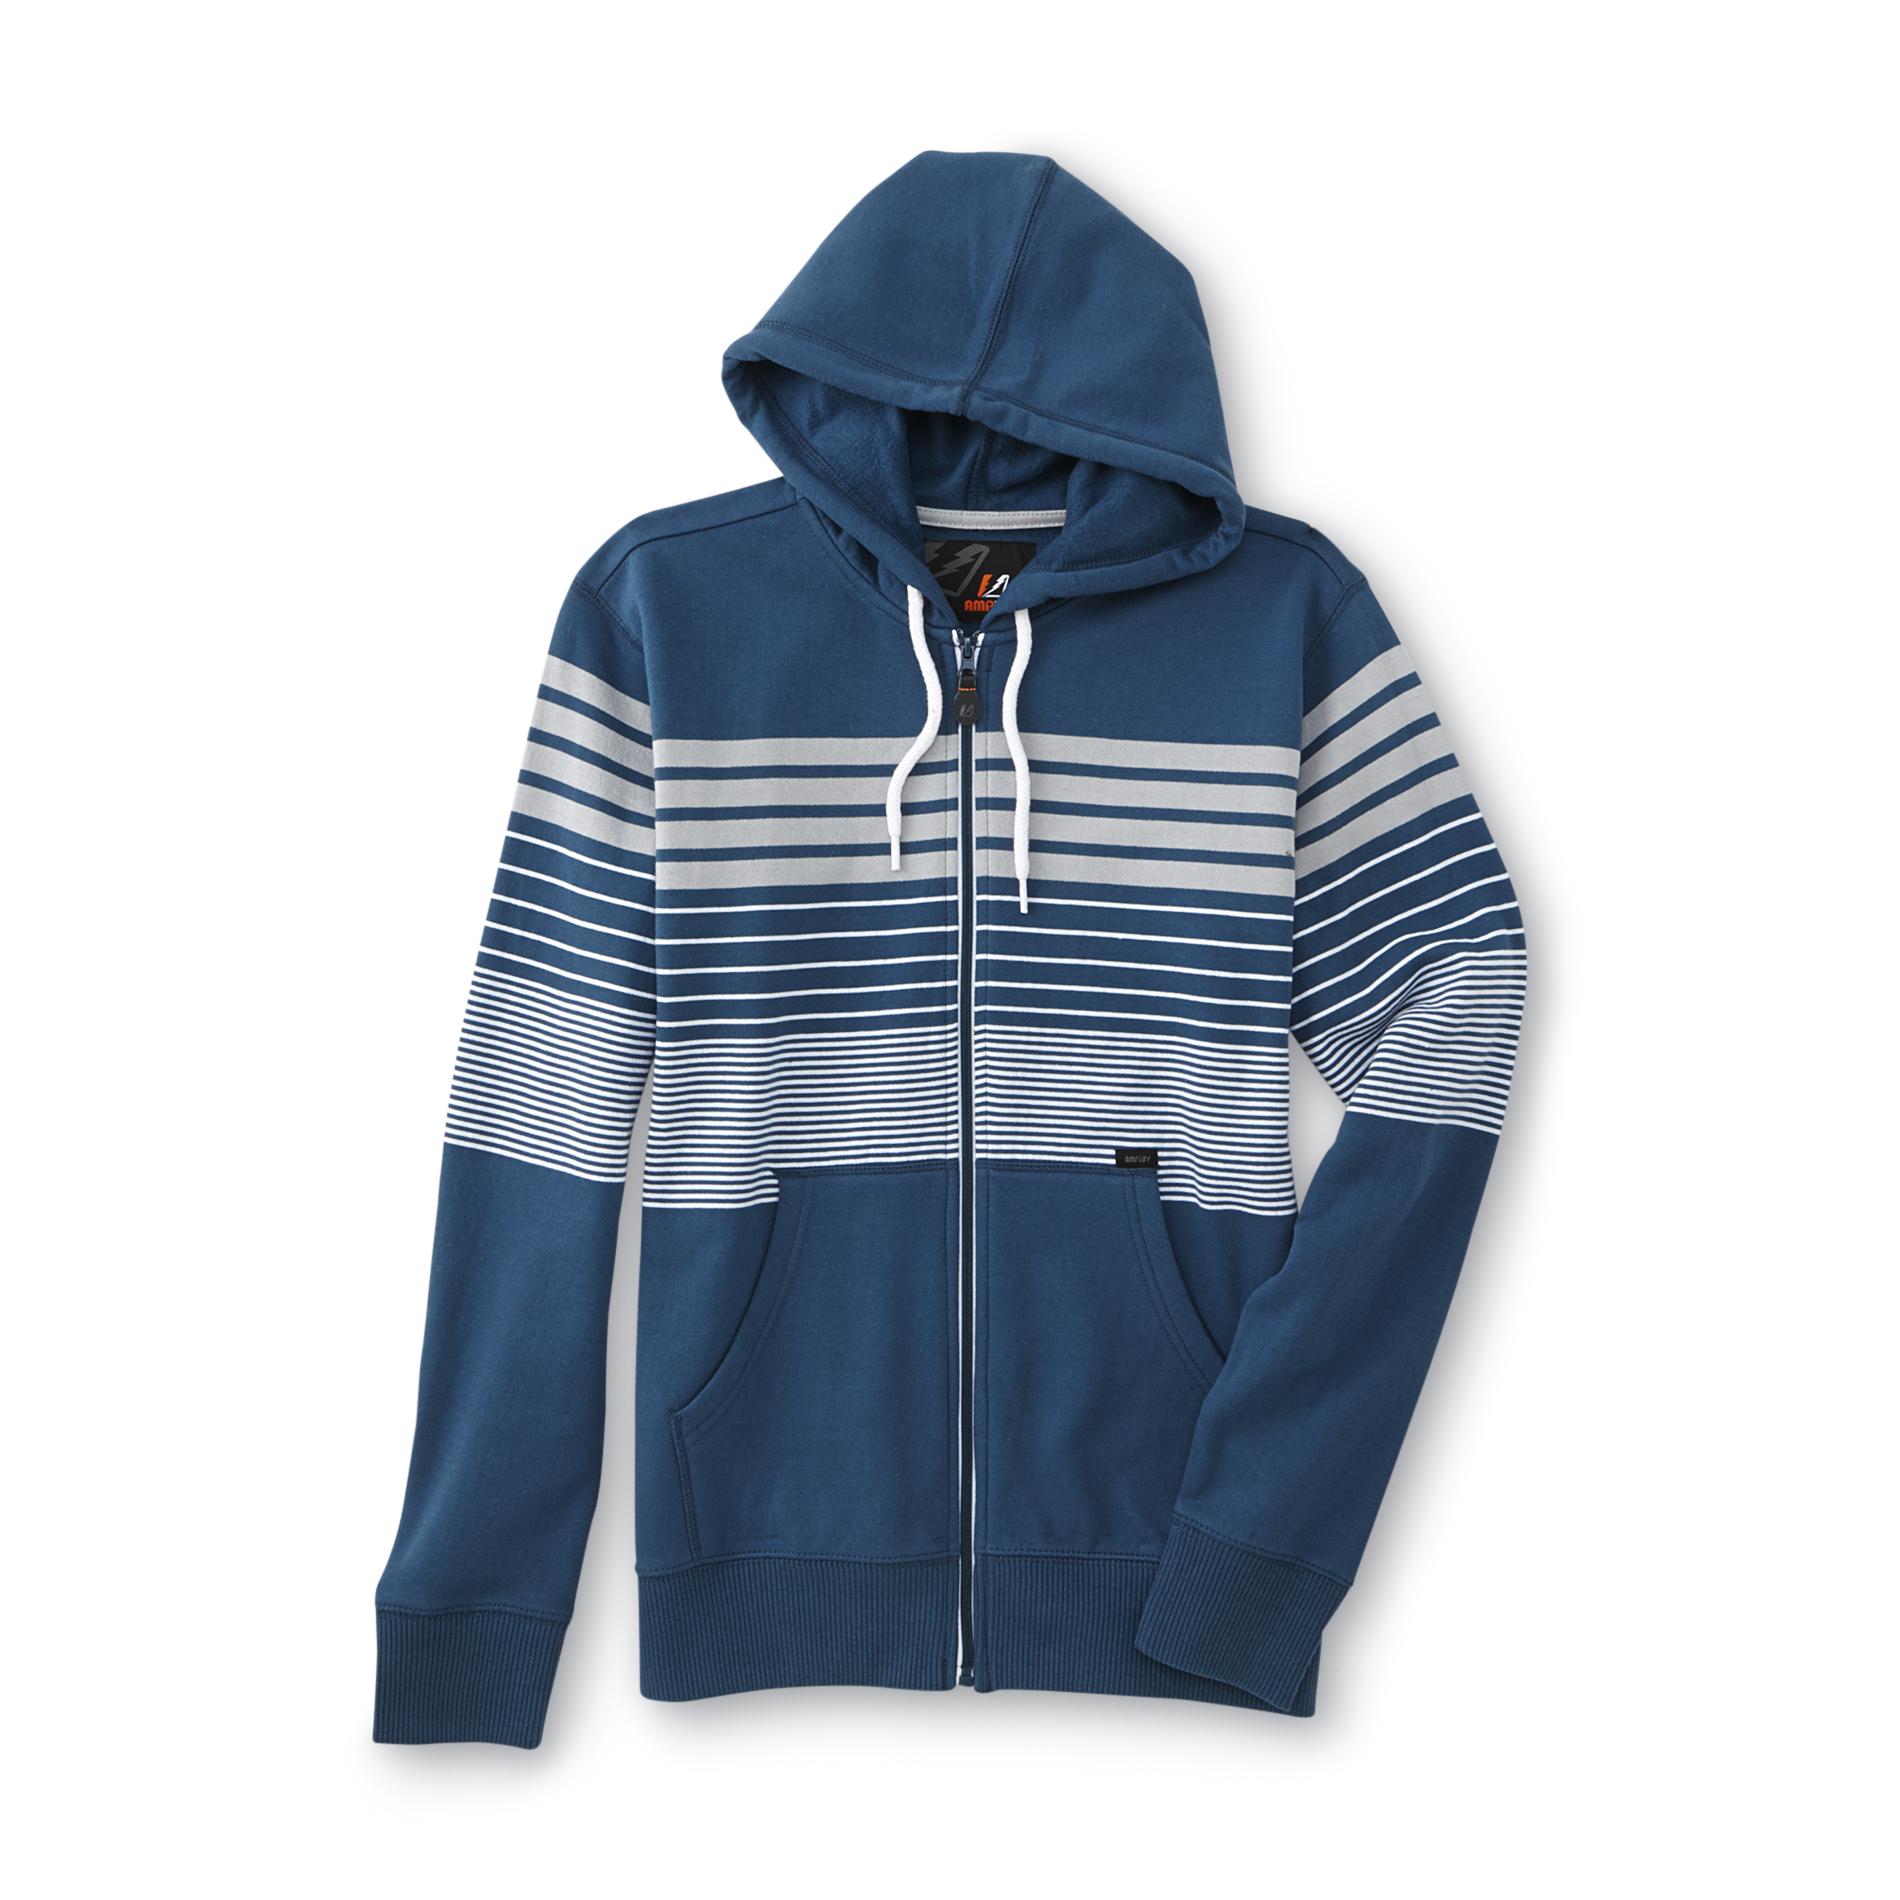 Amplify Young Men's Fleece Lined Hoodie Jacket - Striped